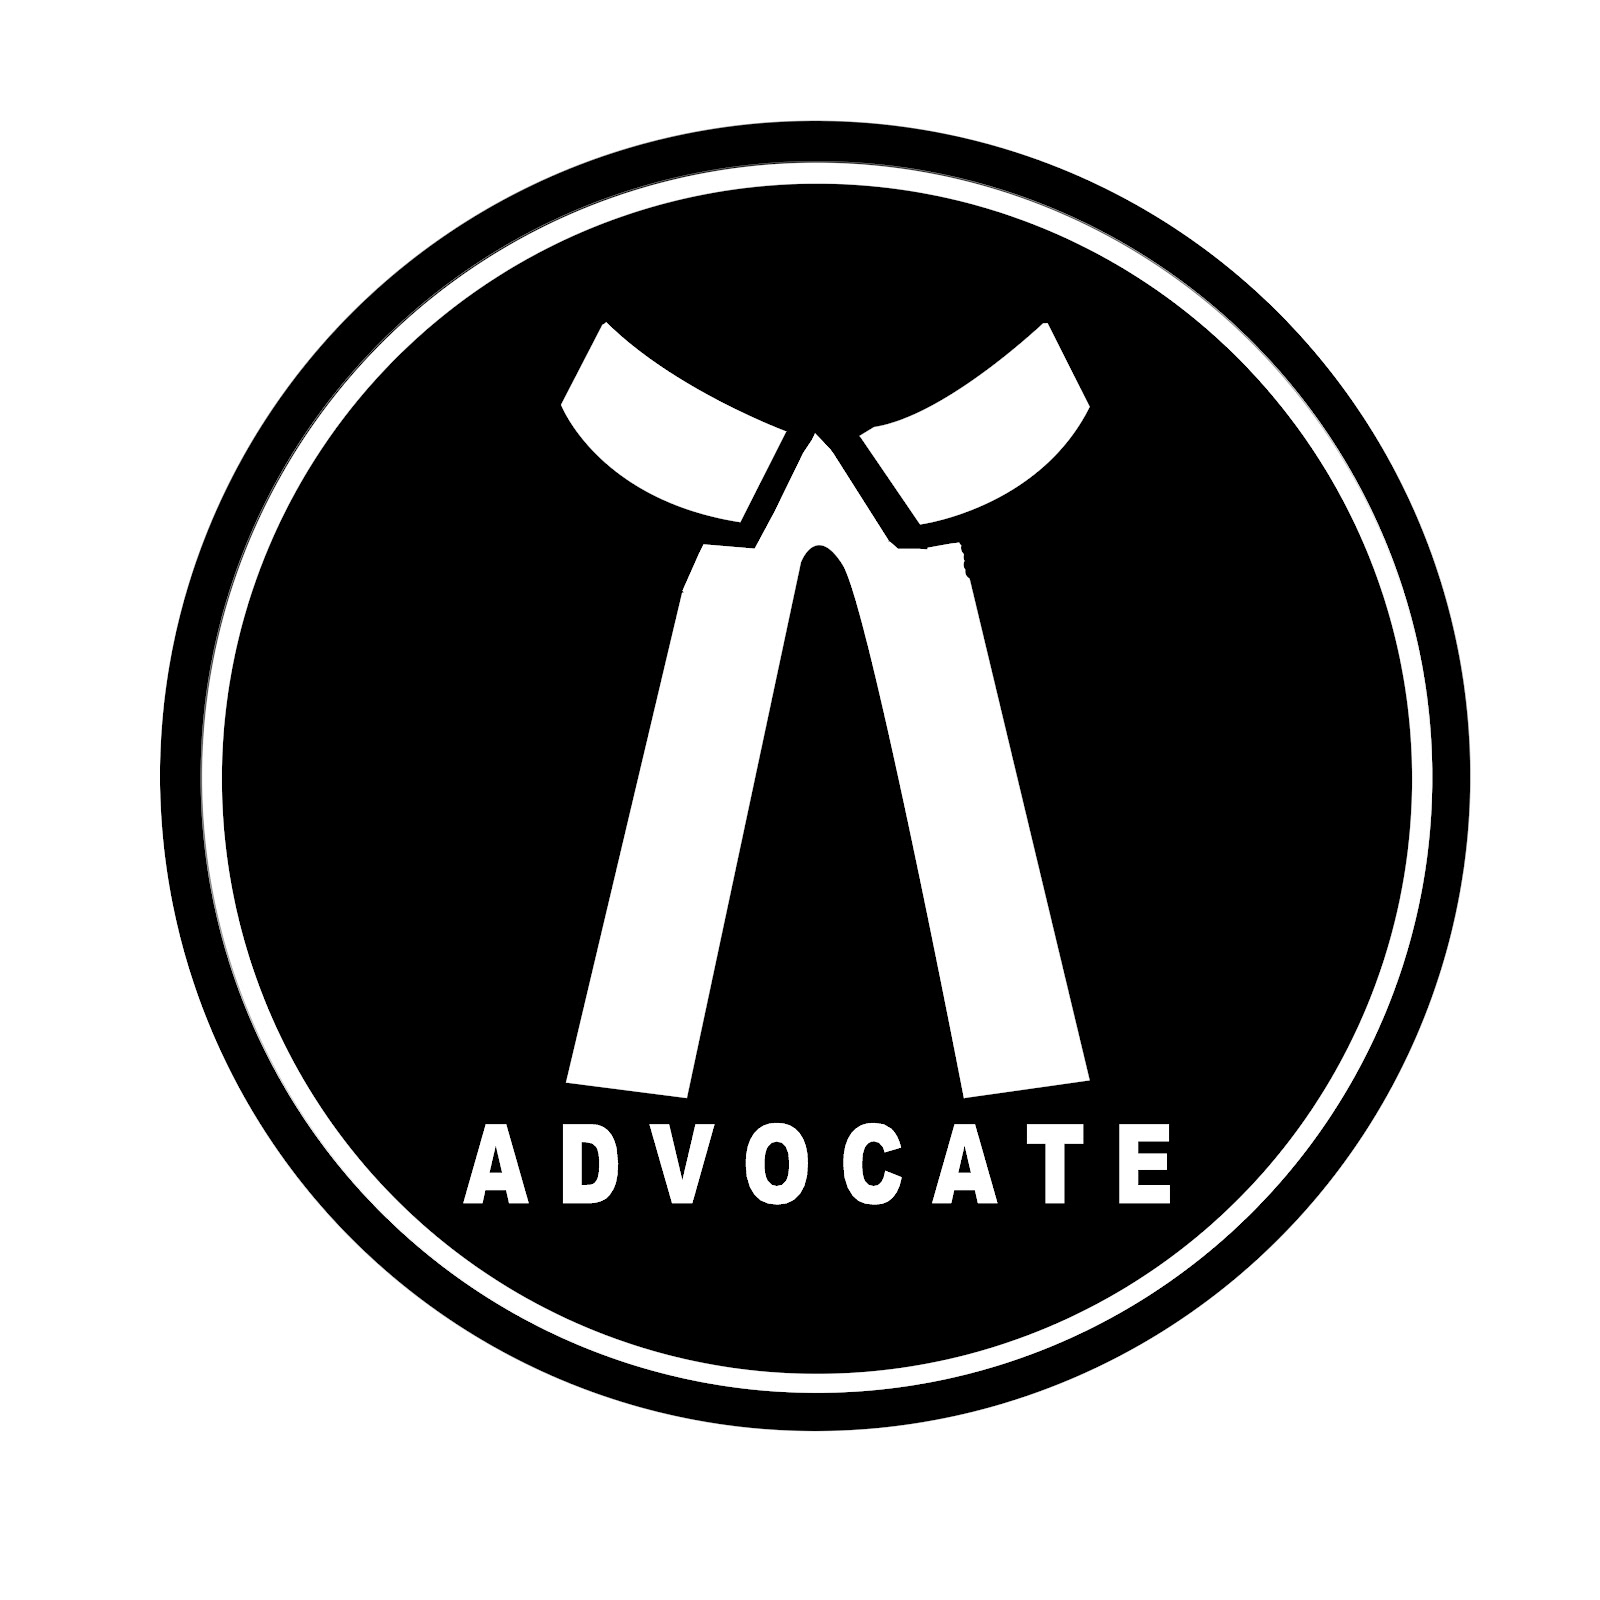 Advocate Logo Projects | Photos, videos, logos, illustrations and branding  on Behance